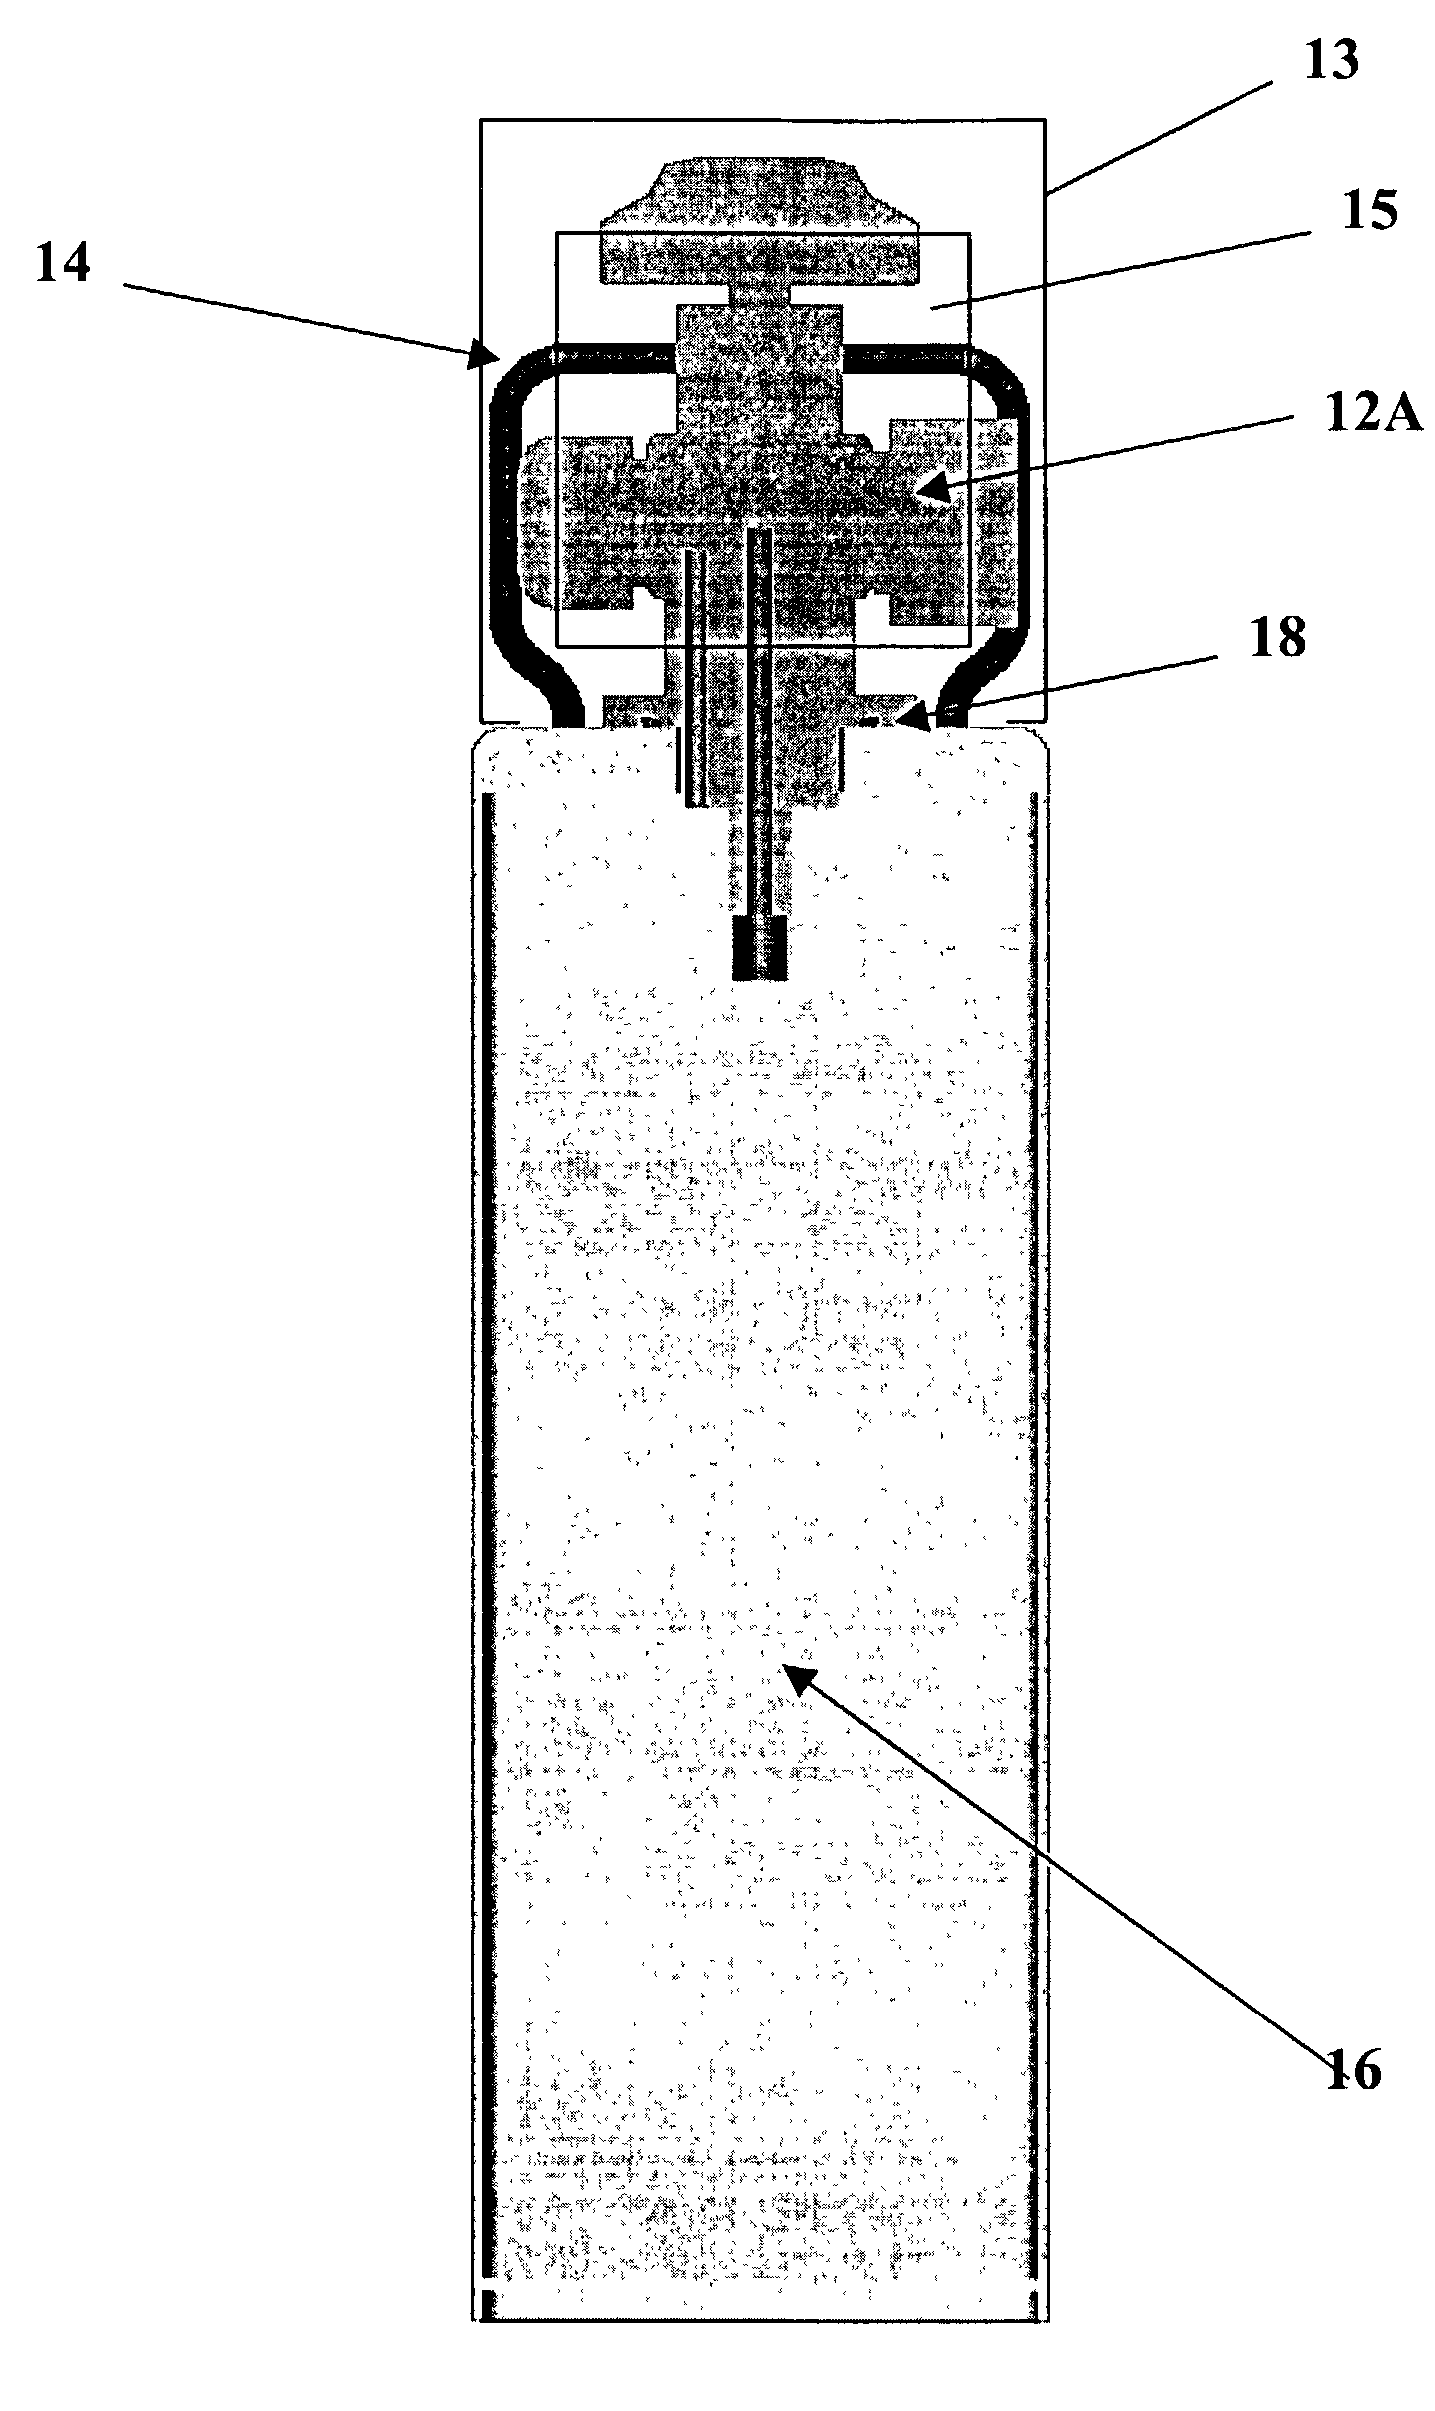 Rectangular parallelepiped fluid storage and dispensing vessel